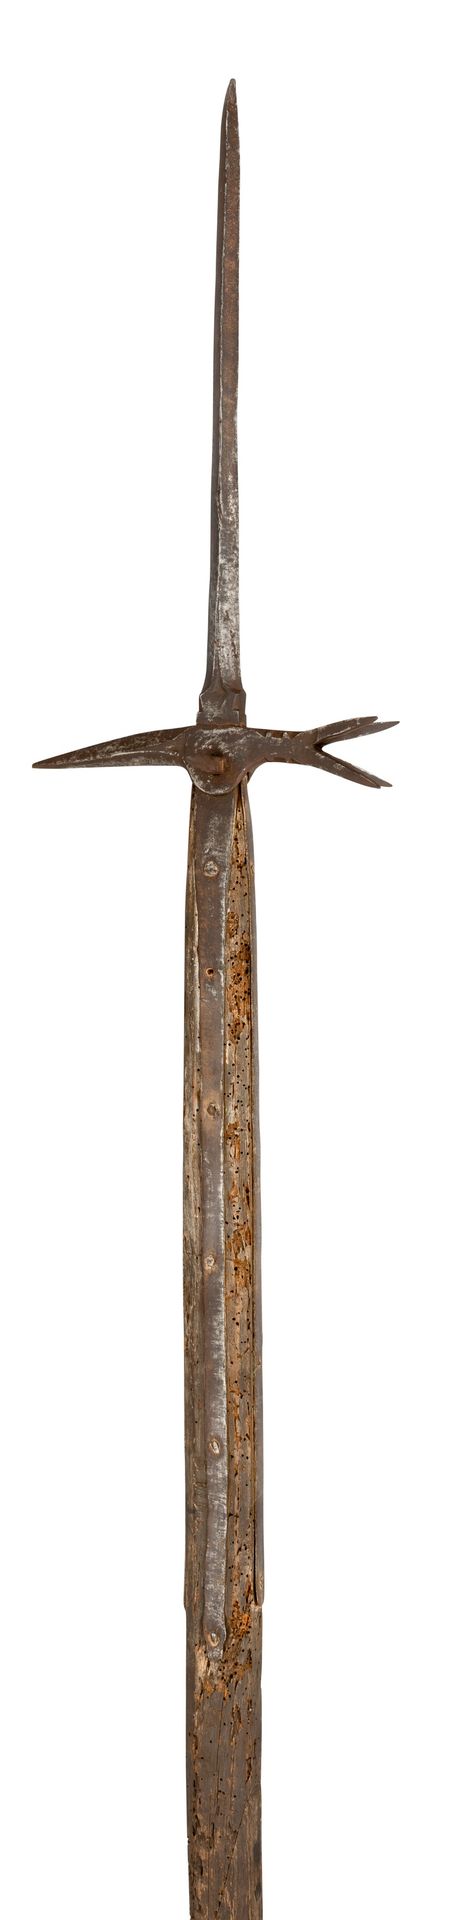 ‡ A LUCERNE HAMMER IN 17TH CENTURY STYLE, 19TH CENTURY, A SPIKED FLAIL, 17TH CEN&hellip;